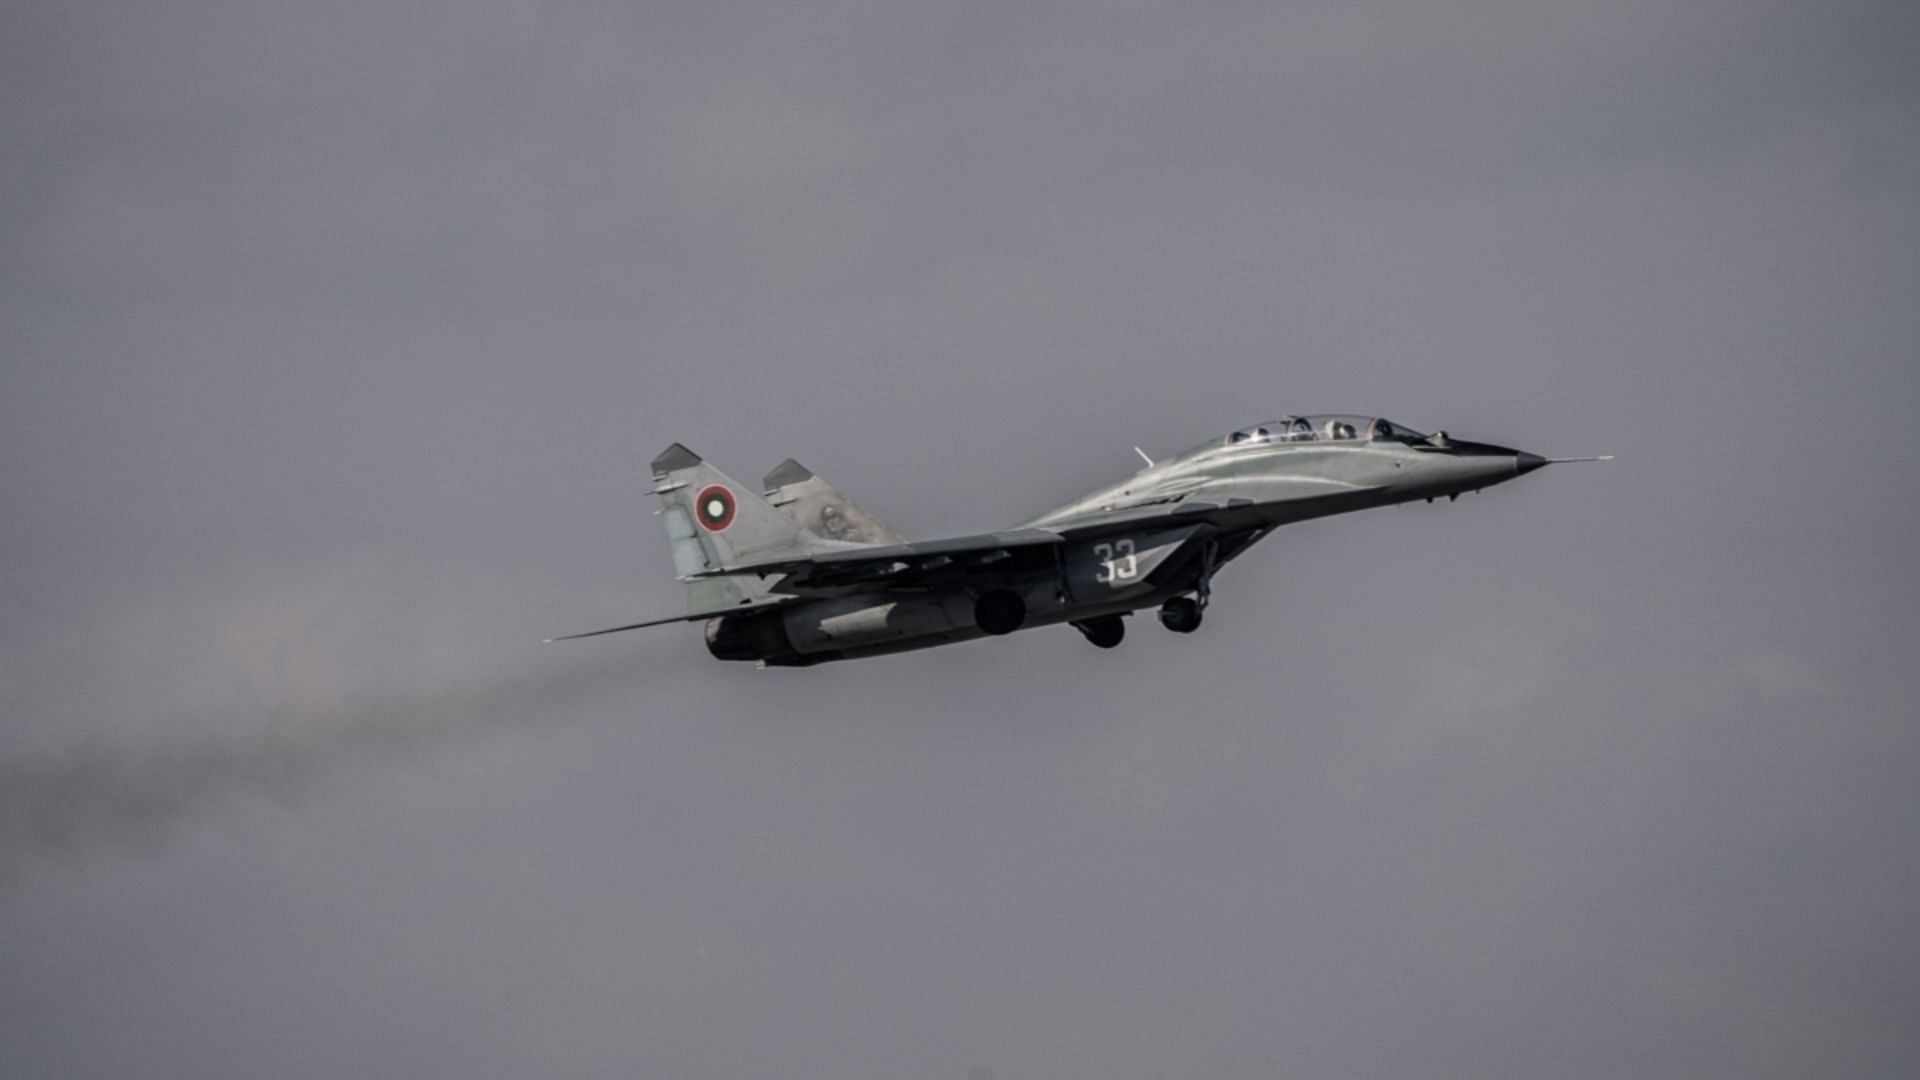 Representational picture of the MiG-29 reportedly flown by the Ghost of Kyiv (Image via Hristo Rusev/Getty Images)